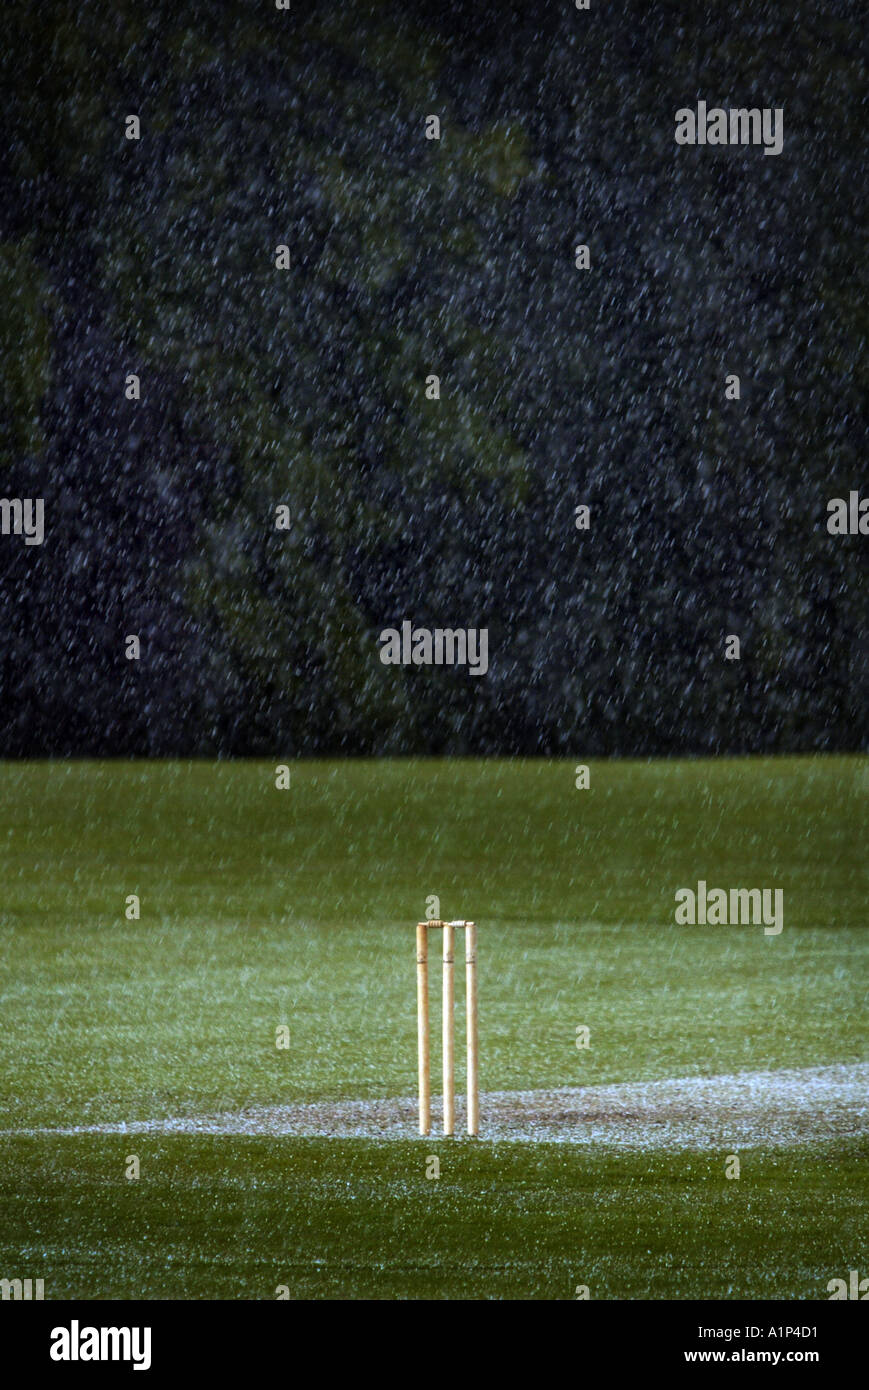 A set of cricket stumps in the middle of a downpour Stock Photo